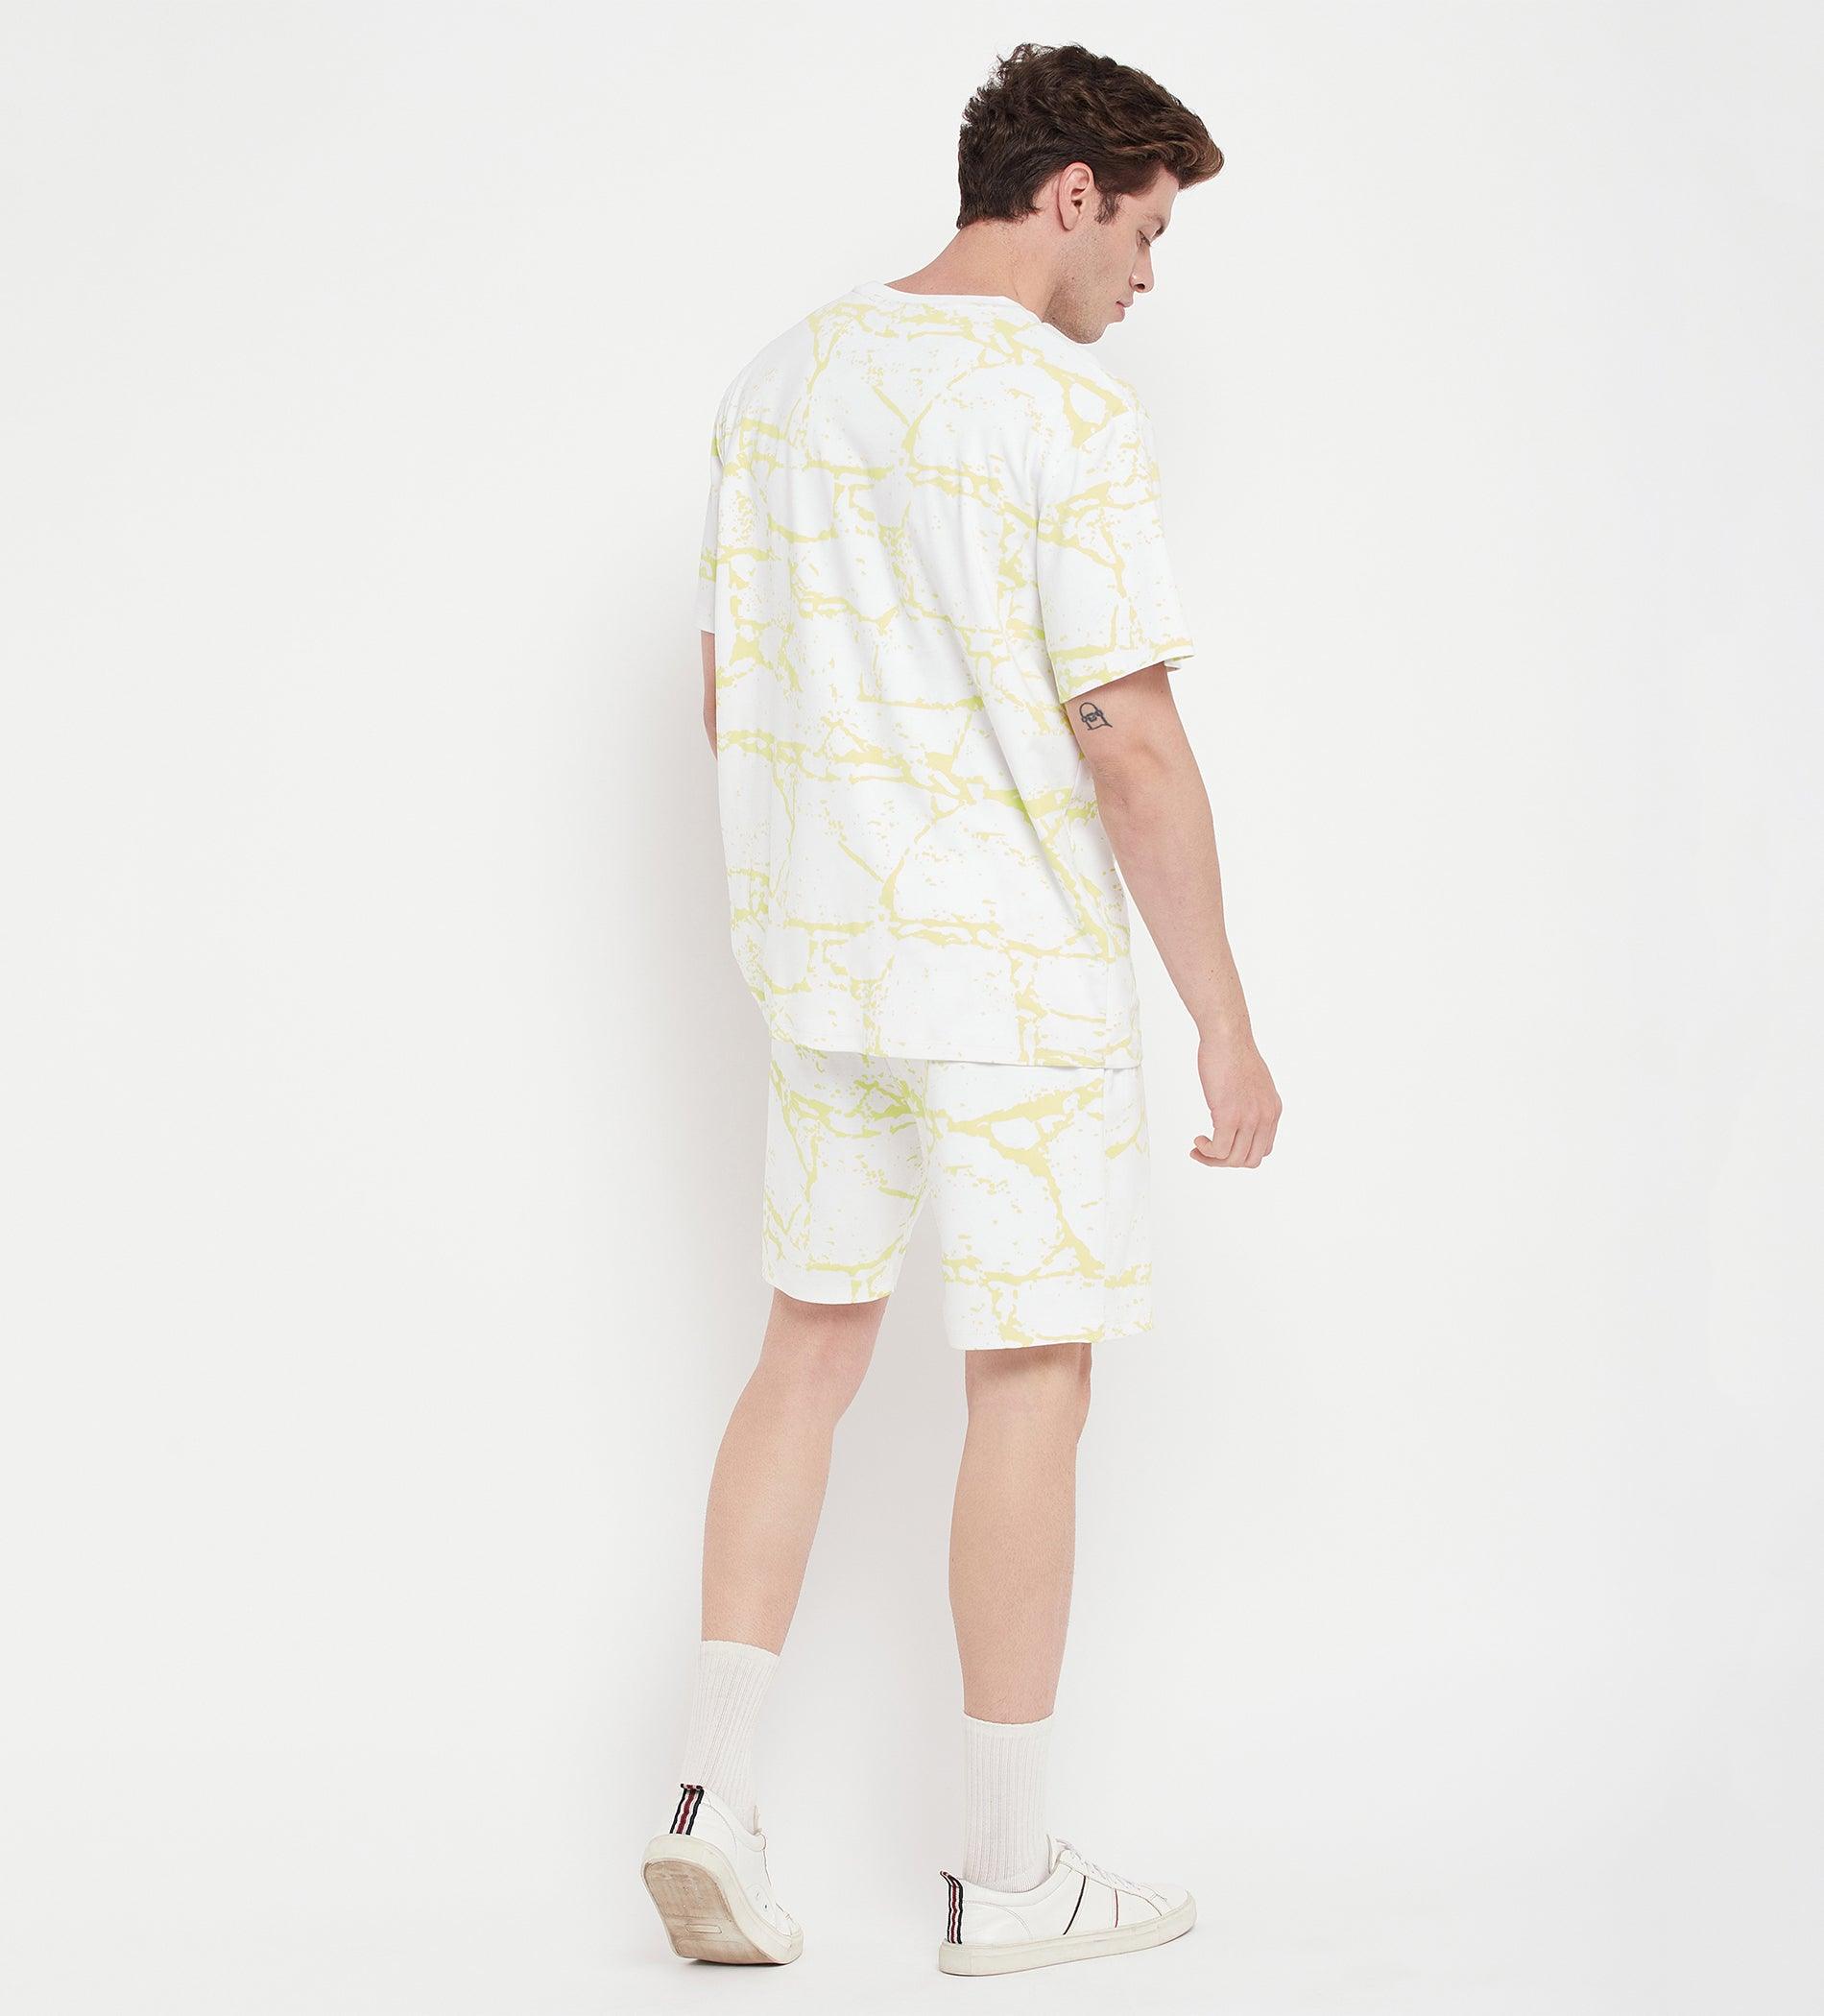 Co-ords Co-Ords Off White Textured Oversized Co-Ord & Shorts Set for Men